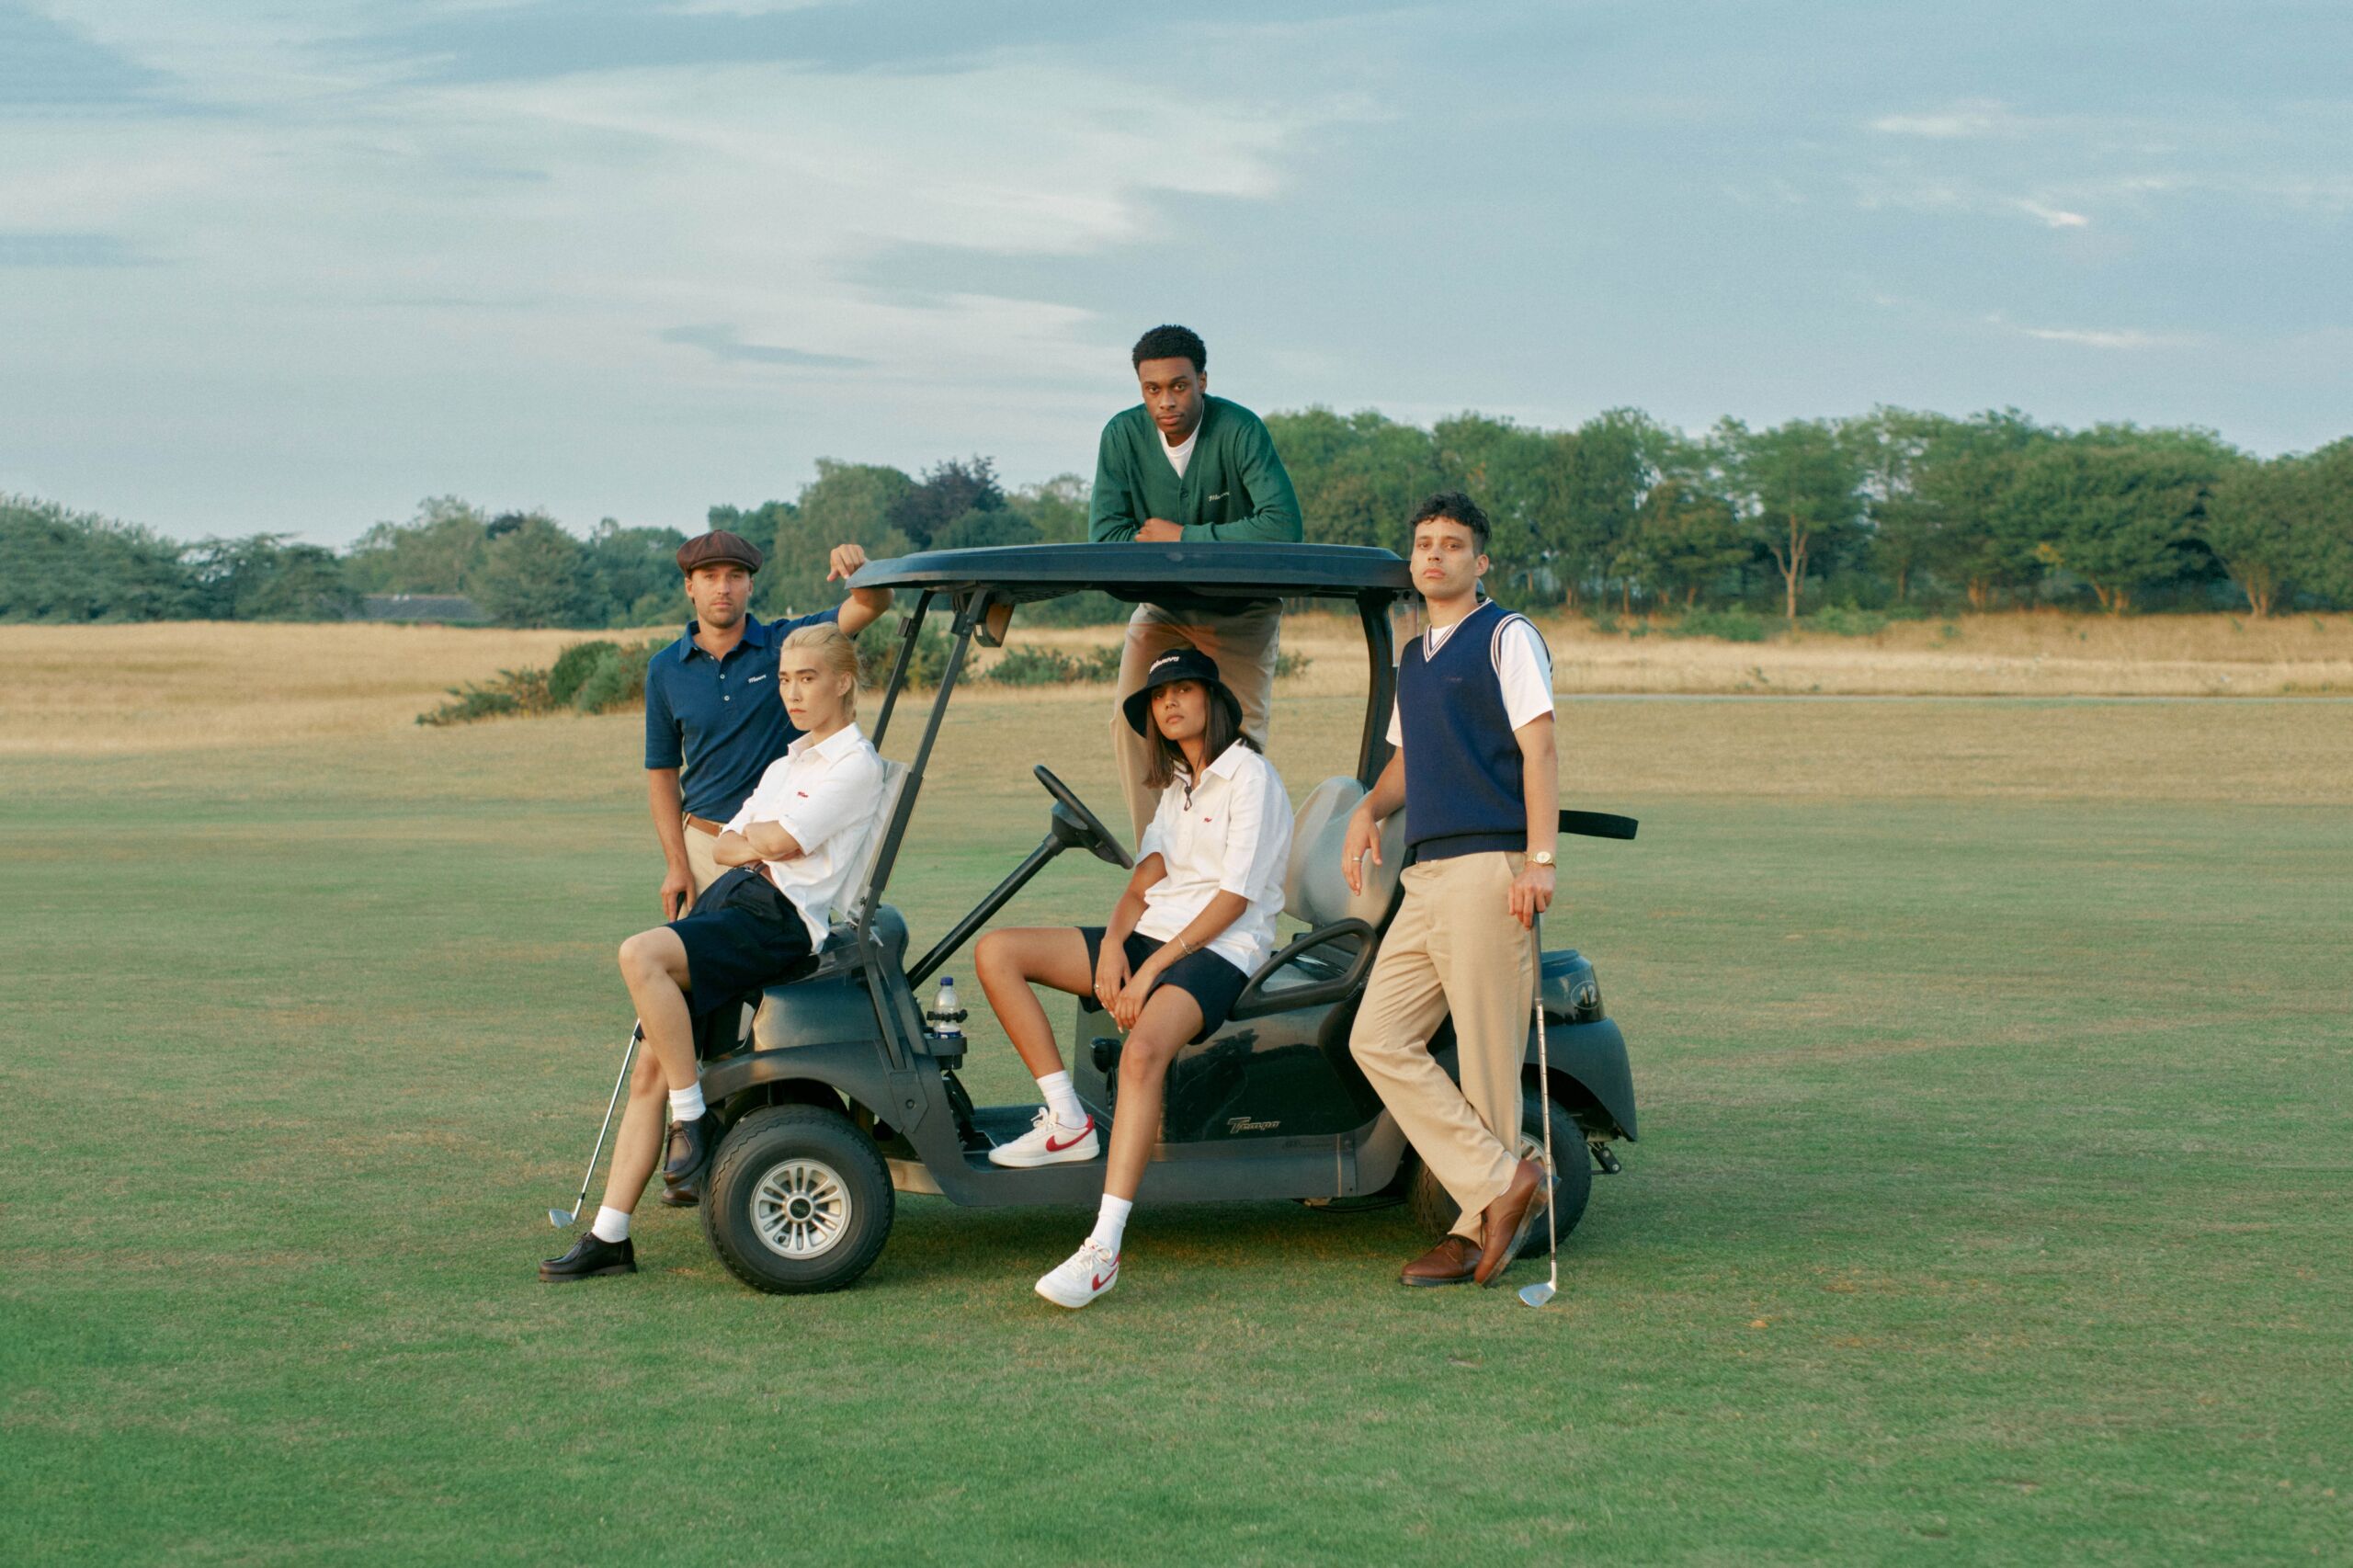 How To Master The Golfcore Fashion Aesthetic